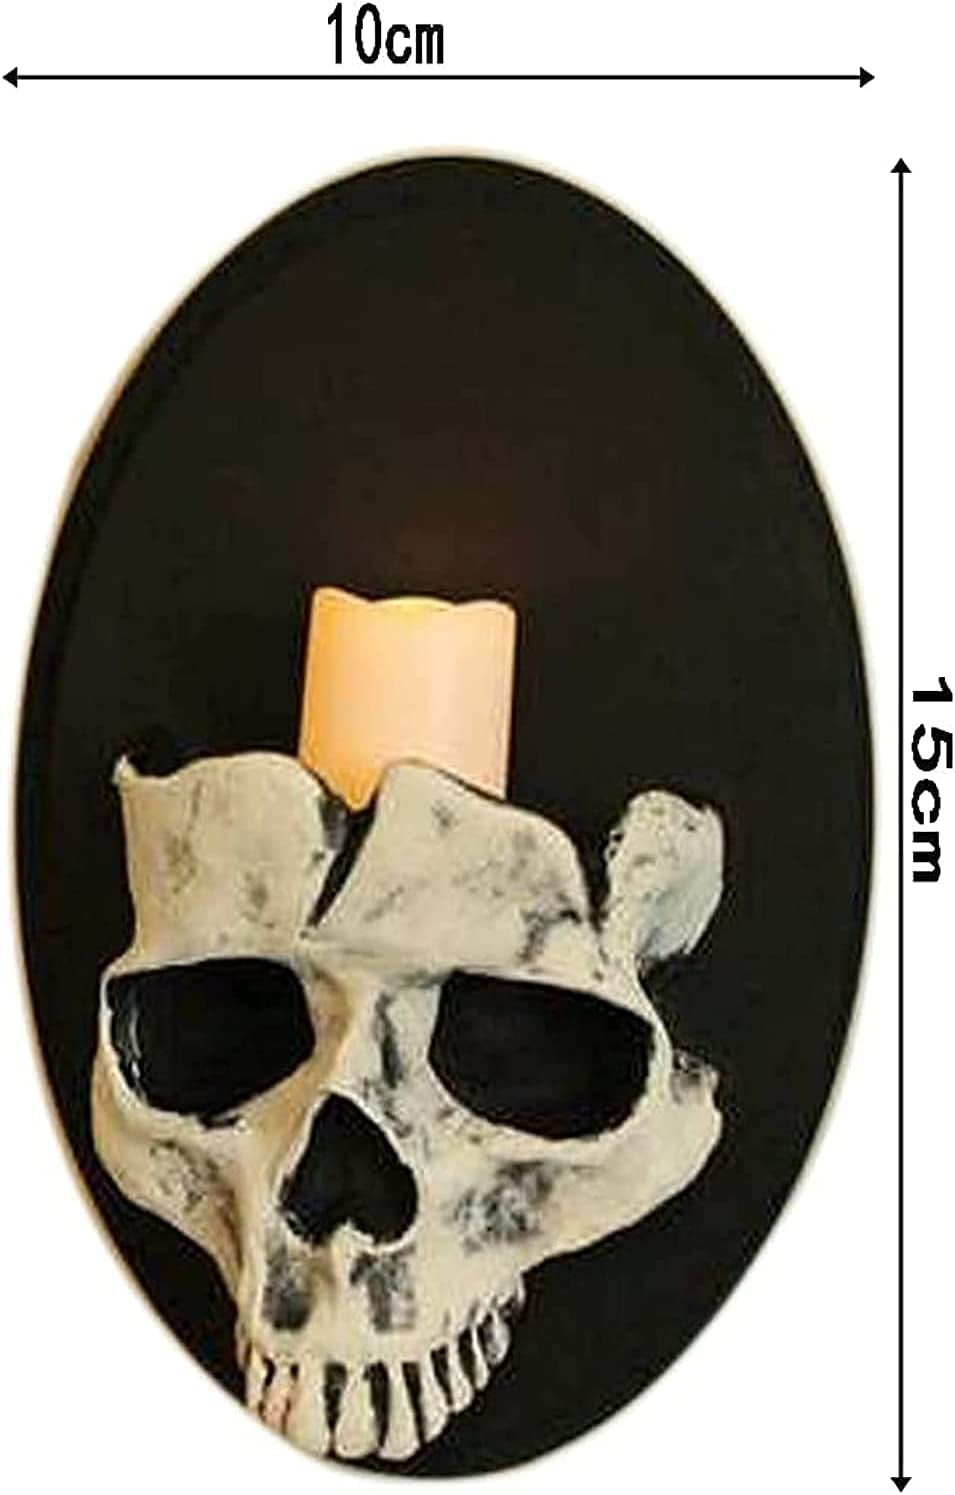 Skull Wall Candle Holder ，Skull Candle Holder Gothic Decor Halloween Decorations ，Suitable for Halloween Candlelight Dinner, Dining Room, Living Room and Shop（2Pcs）